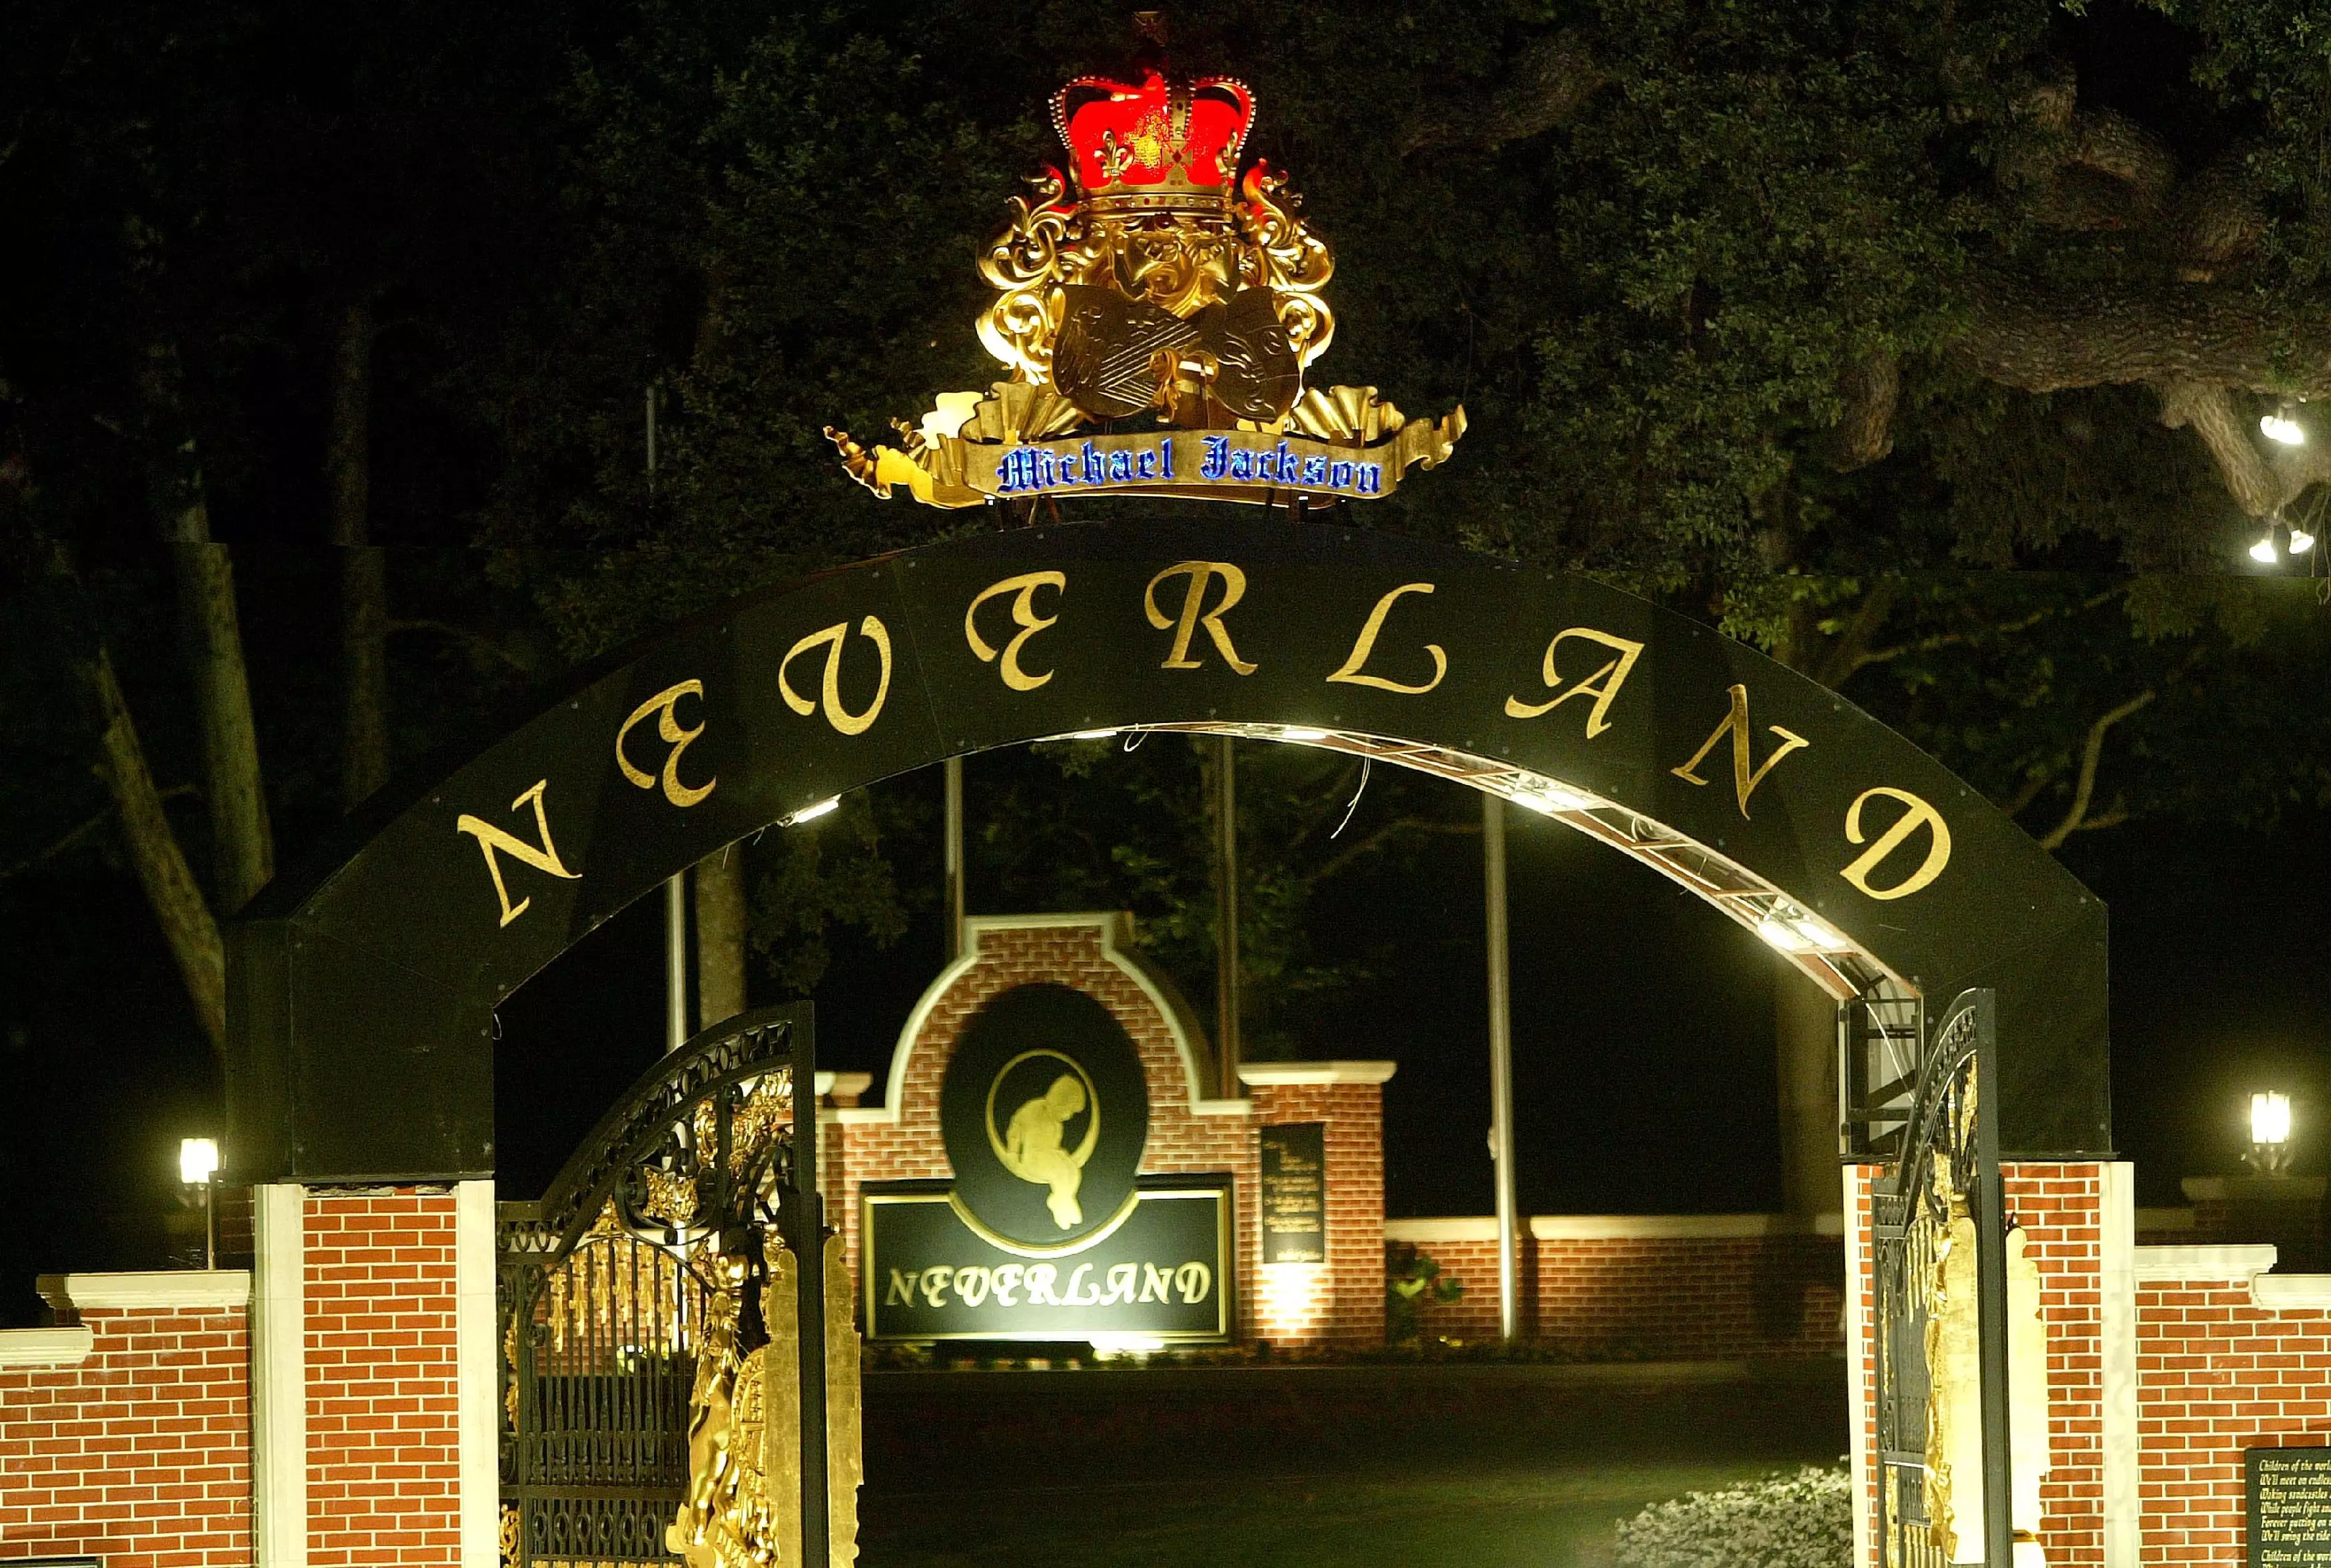 Neverland Ranch lit up in the evening.